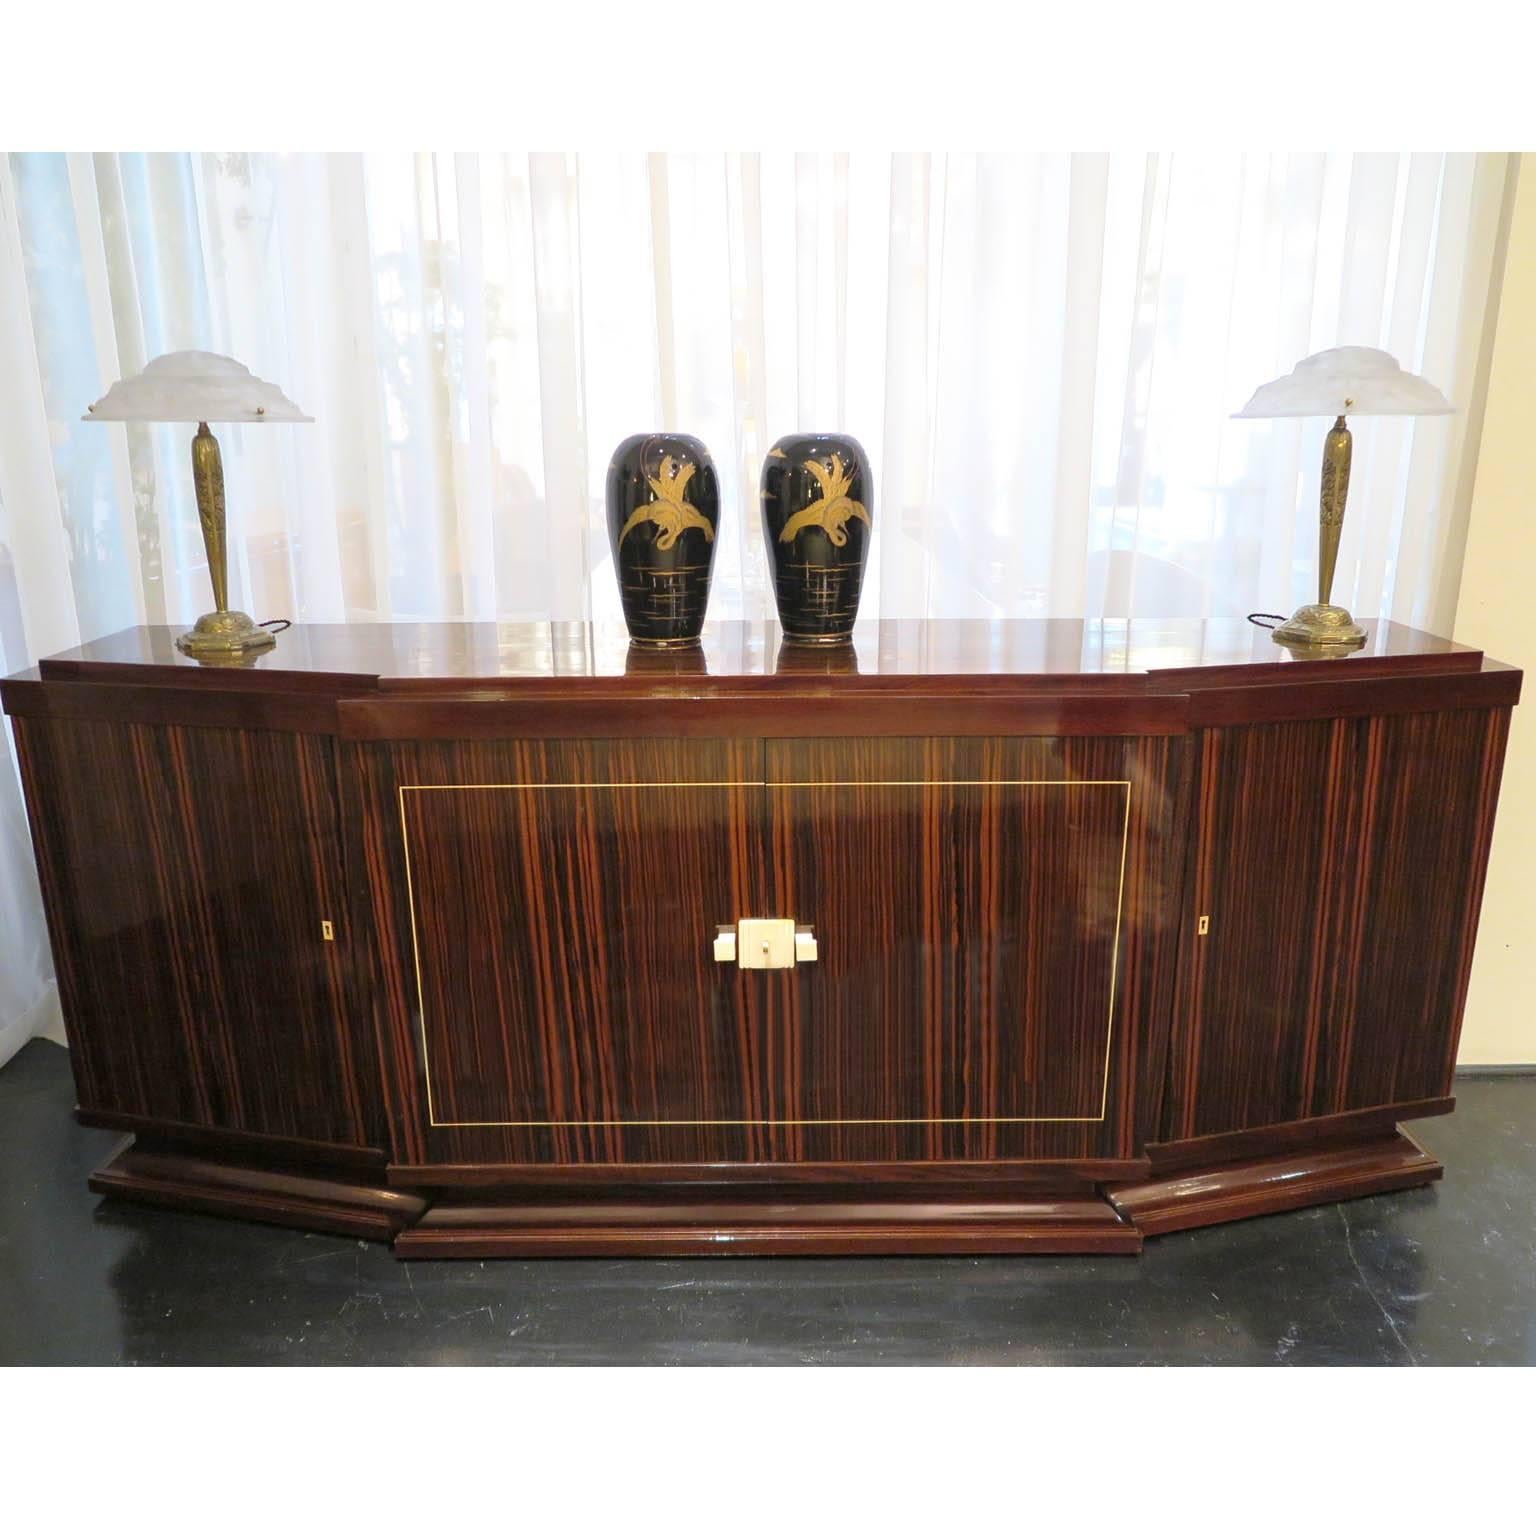 Elegant Macassar ebony sideboard with mahogany details. Original ivory hardware and thin inlayed ivory border around center doors. Signed by Majorelle on right side of piece. Slanted frame on sides with prominent middle doors. Shelving in center